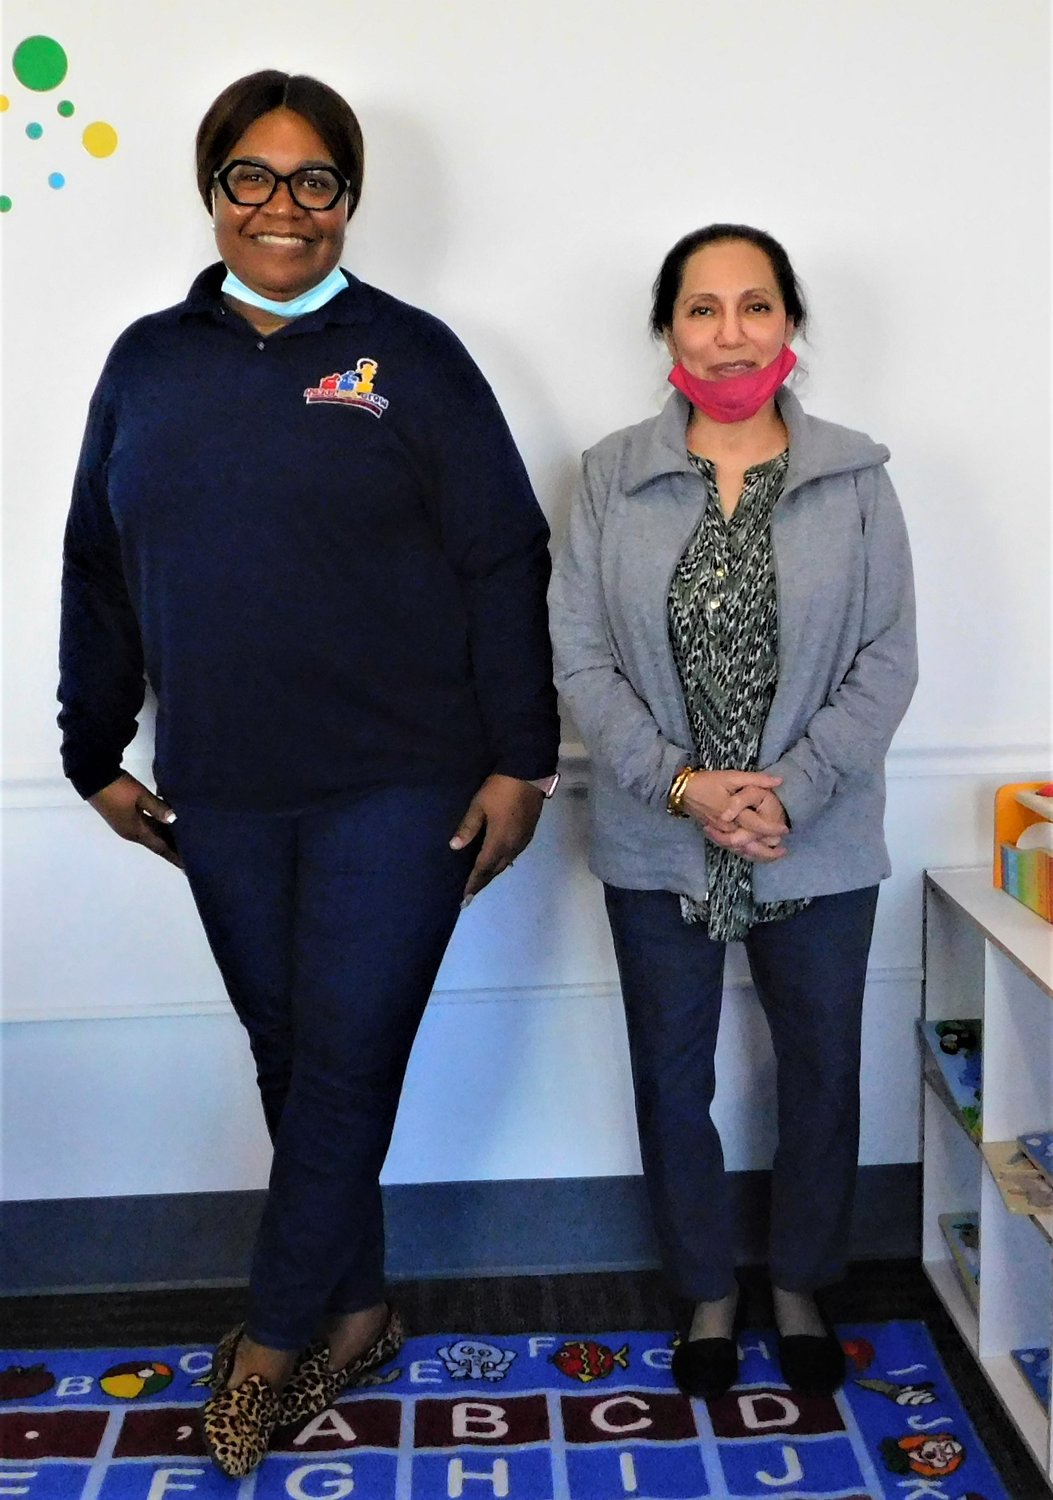 Naheed Khan, right, the director of Ready Set Grow Learning Academy, co-owned by Chelisa Harris, left, presented experienced-based reasons for more government support of child care providers. The business is in the Freeport Armory building.